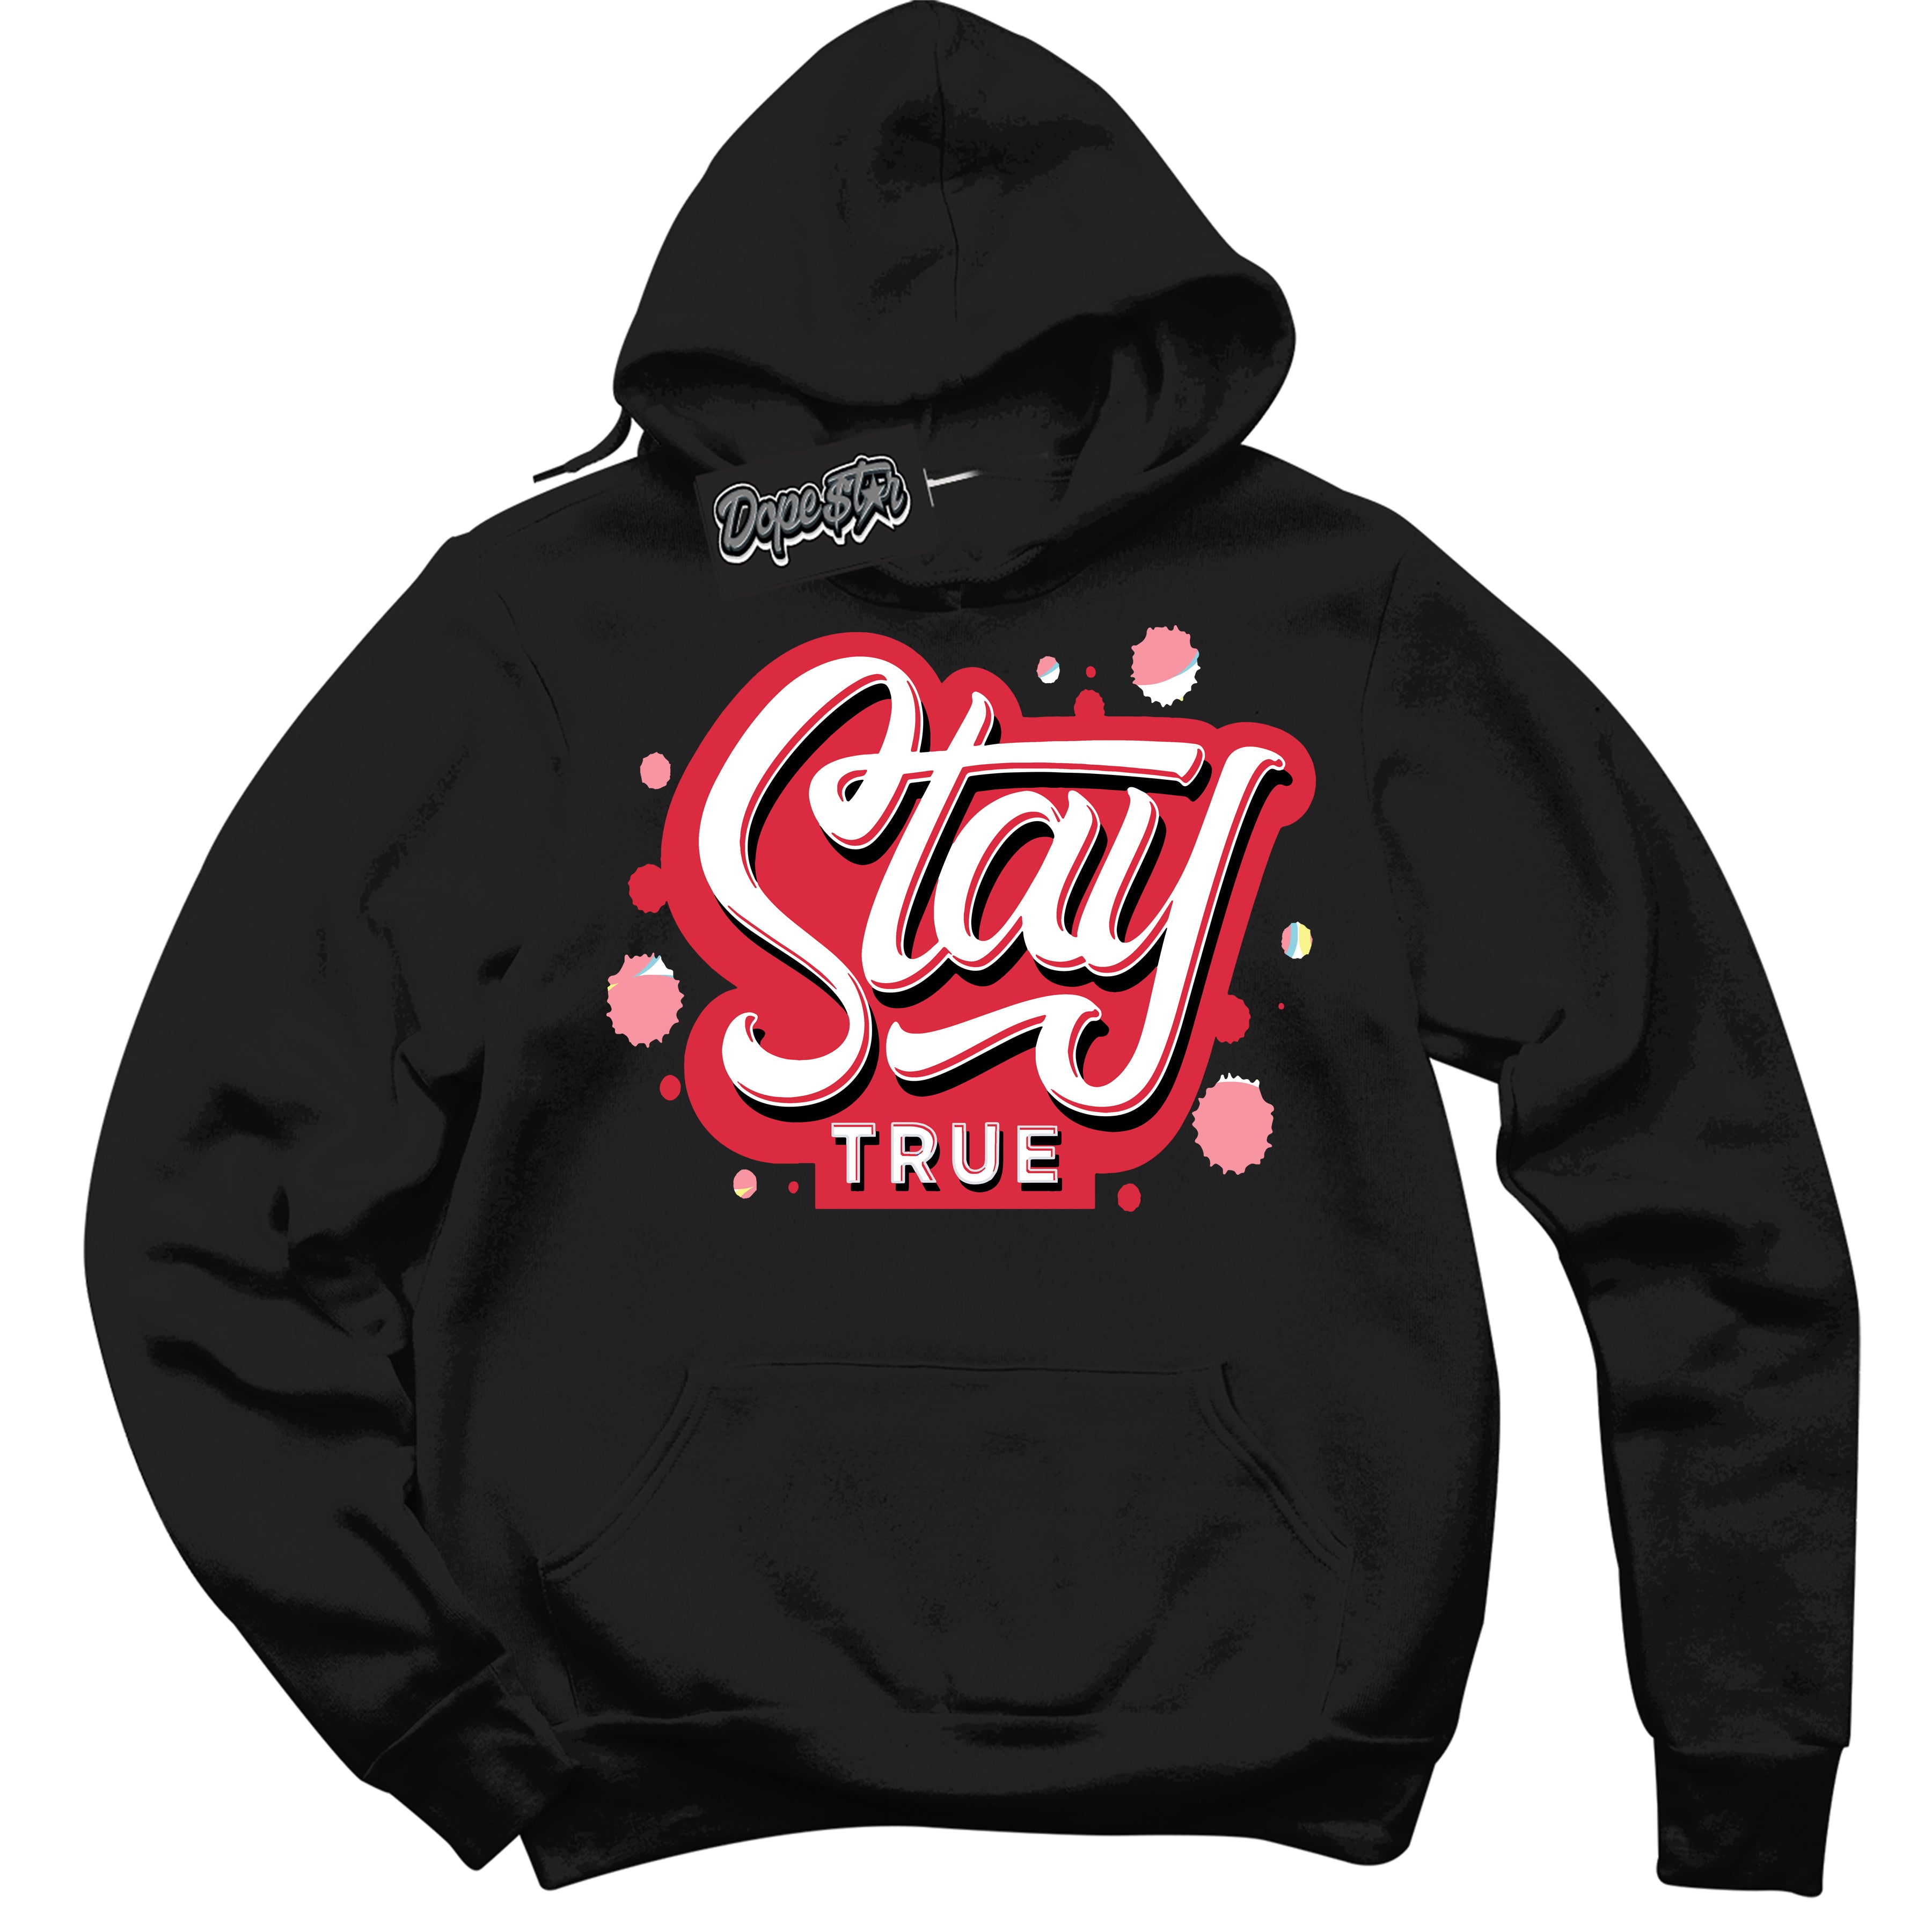 Cool Black Graphic DopeStar Hoodie with “ Stay True “ print, that perfectly matches Spider-Verse 1s sneakers